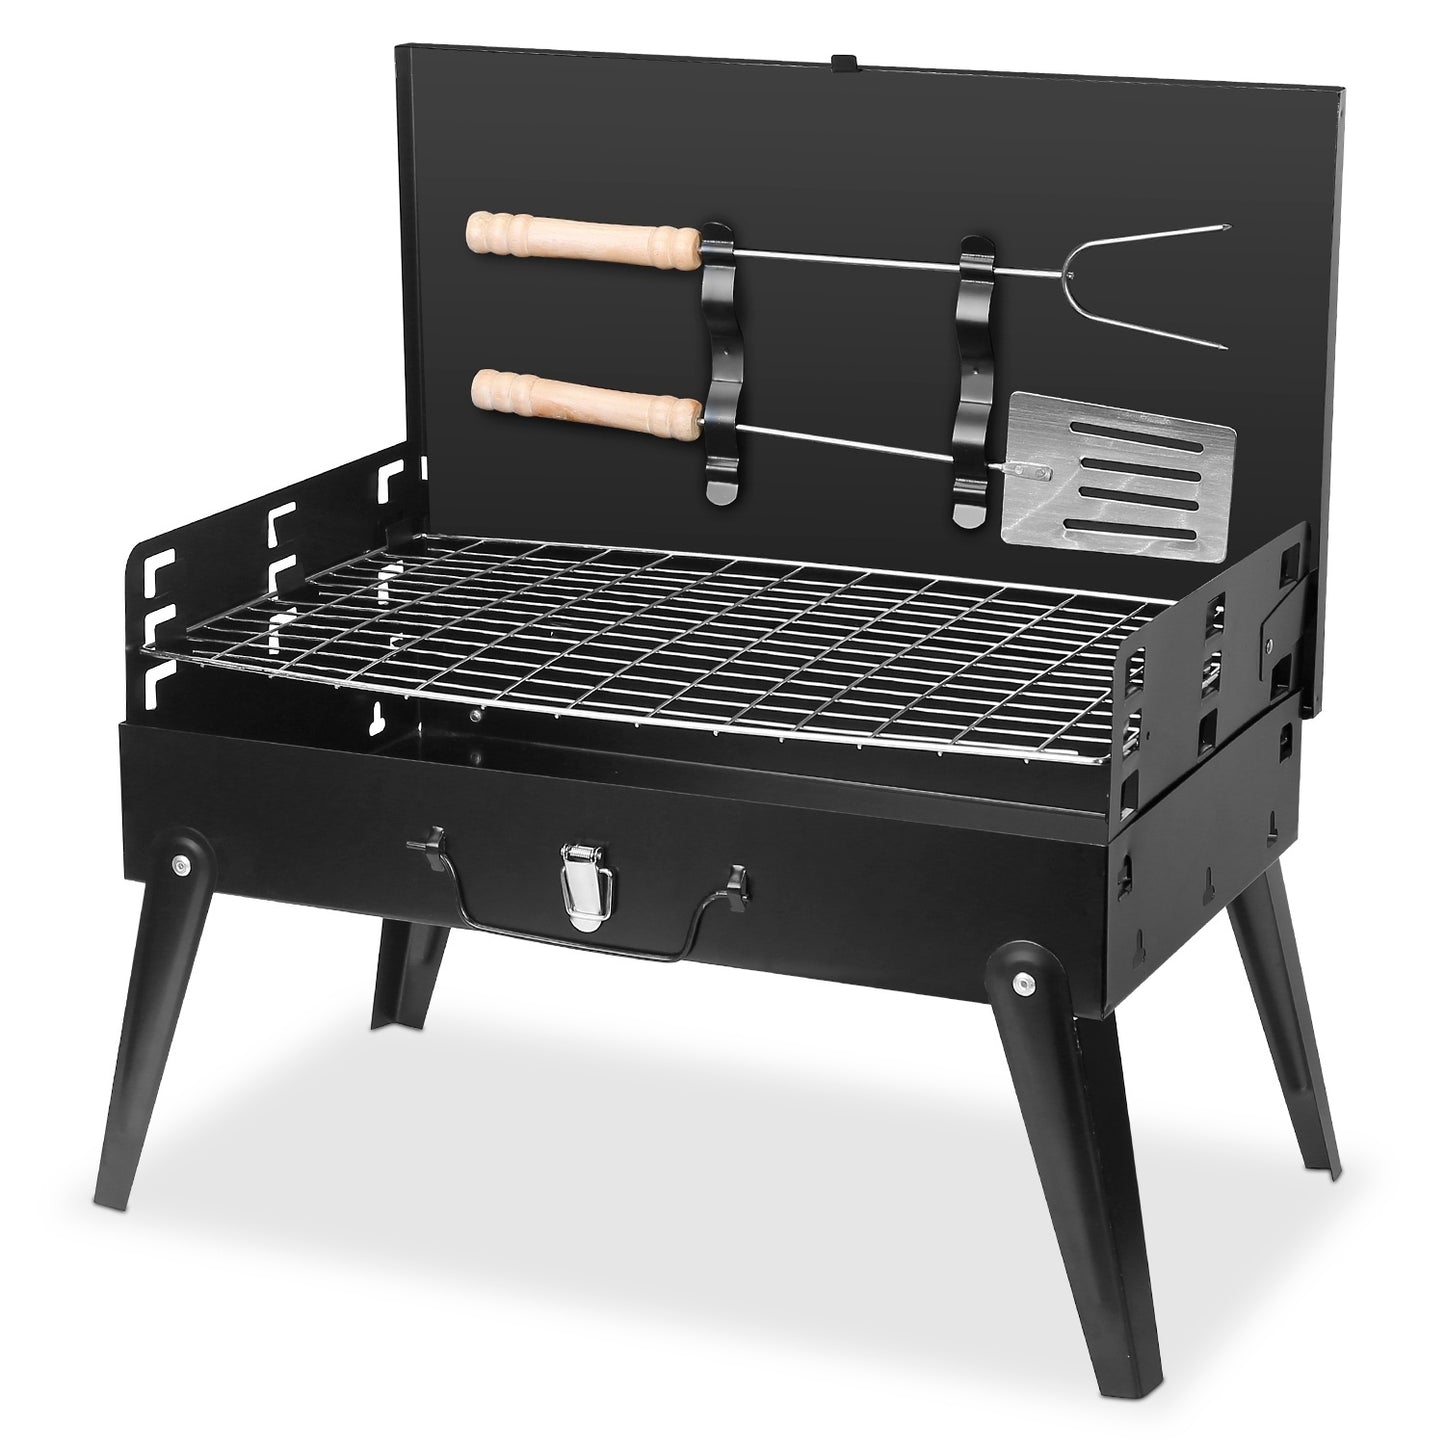 16.7x10x17.7in Portable Charcoal Grill